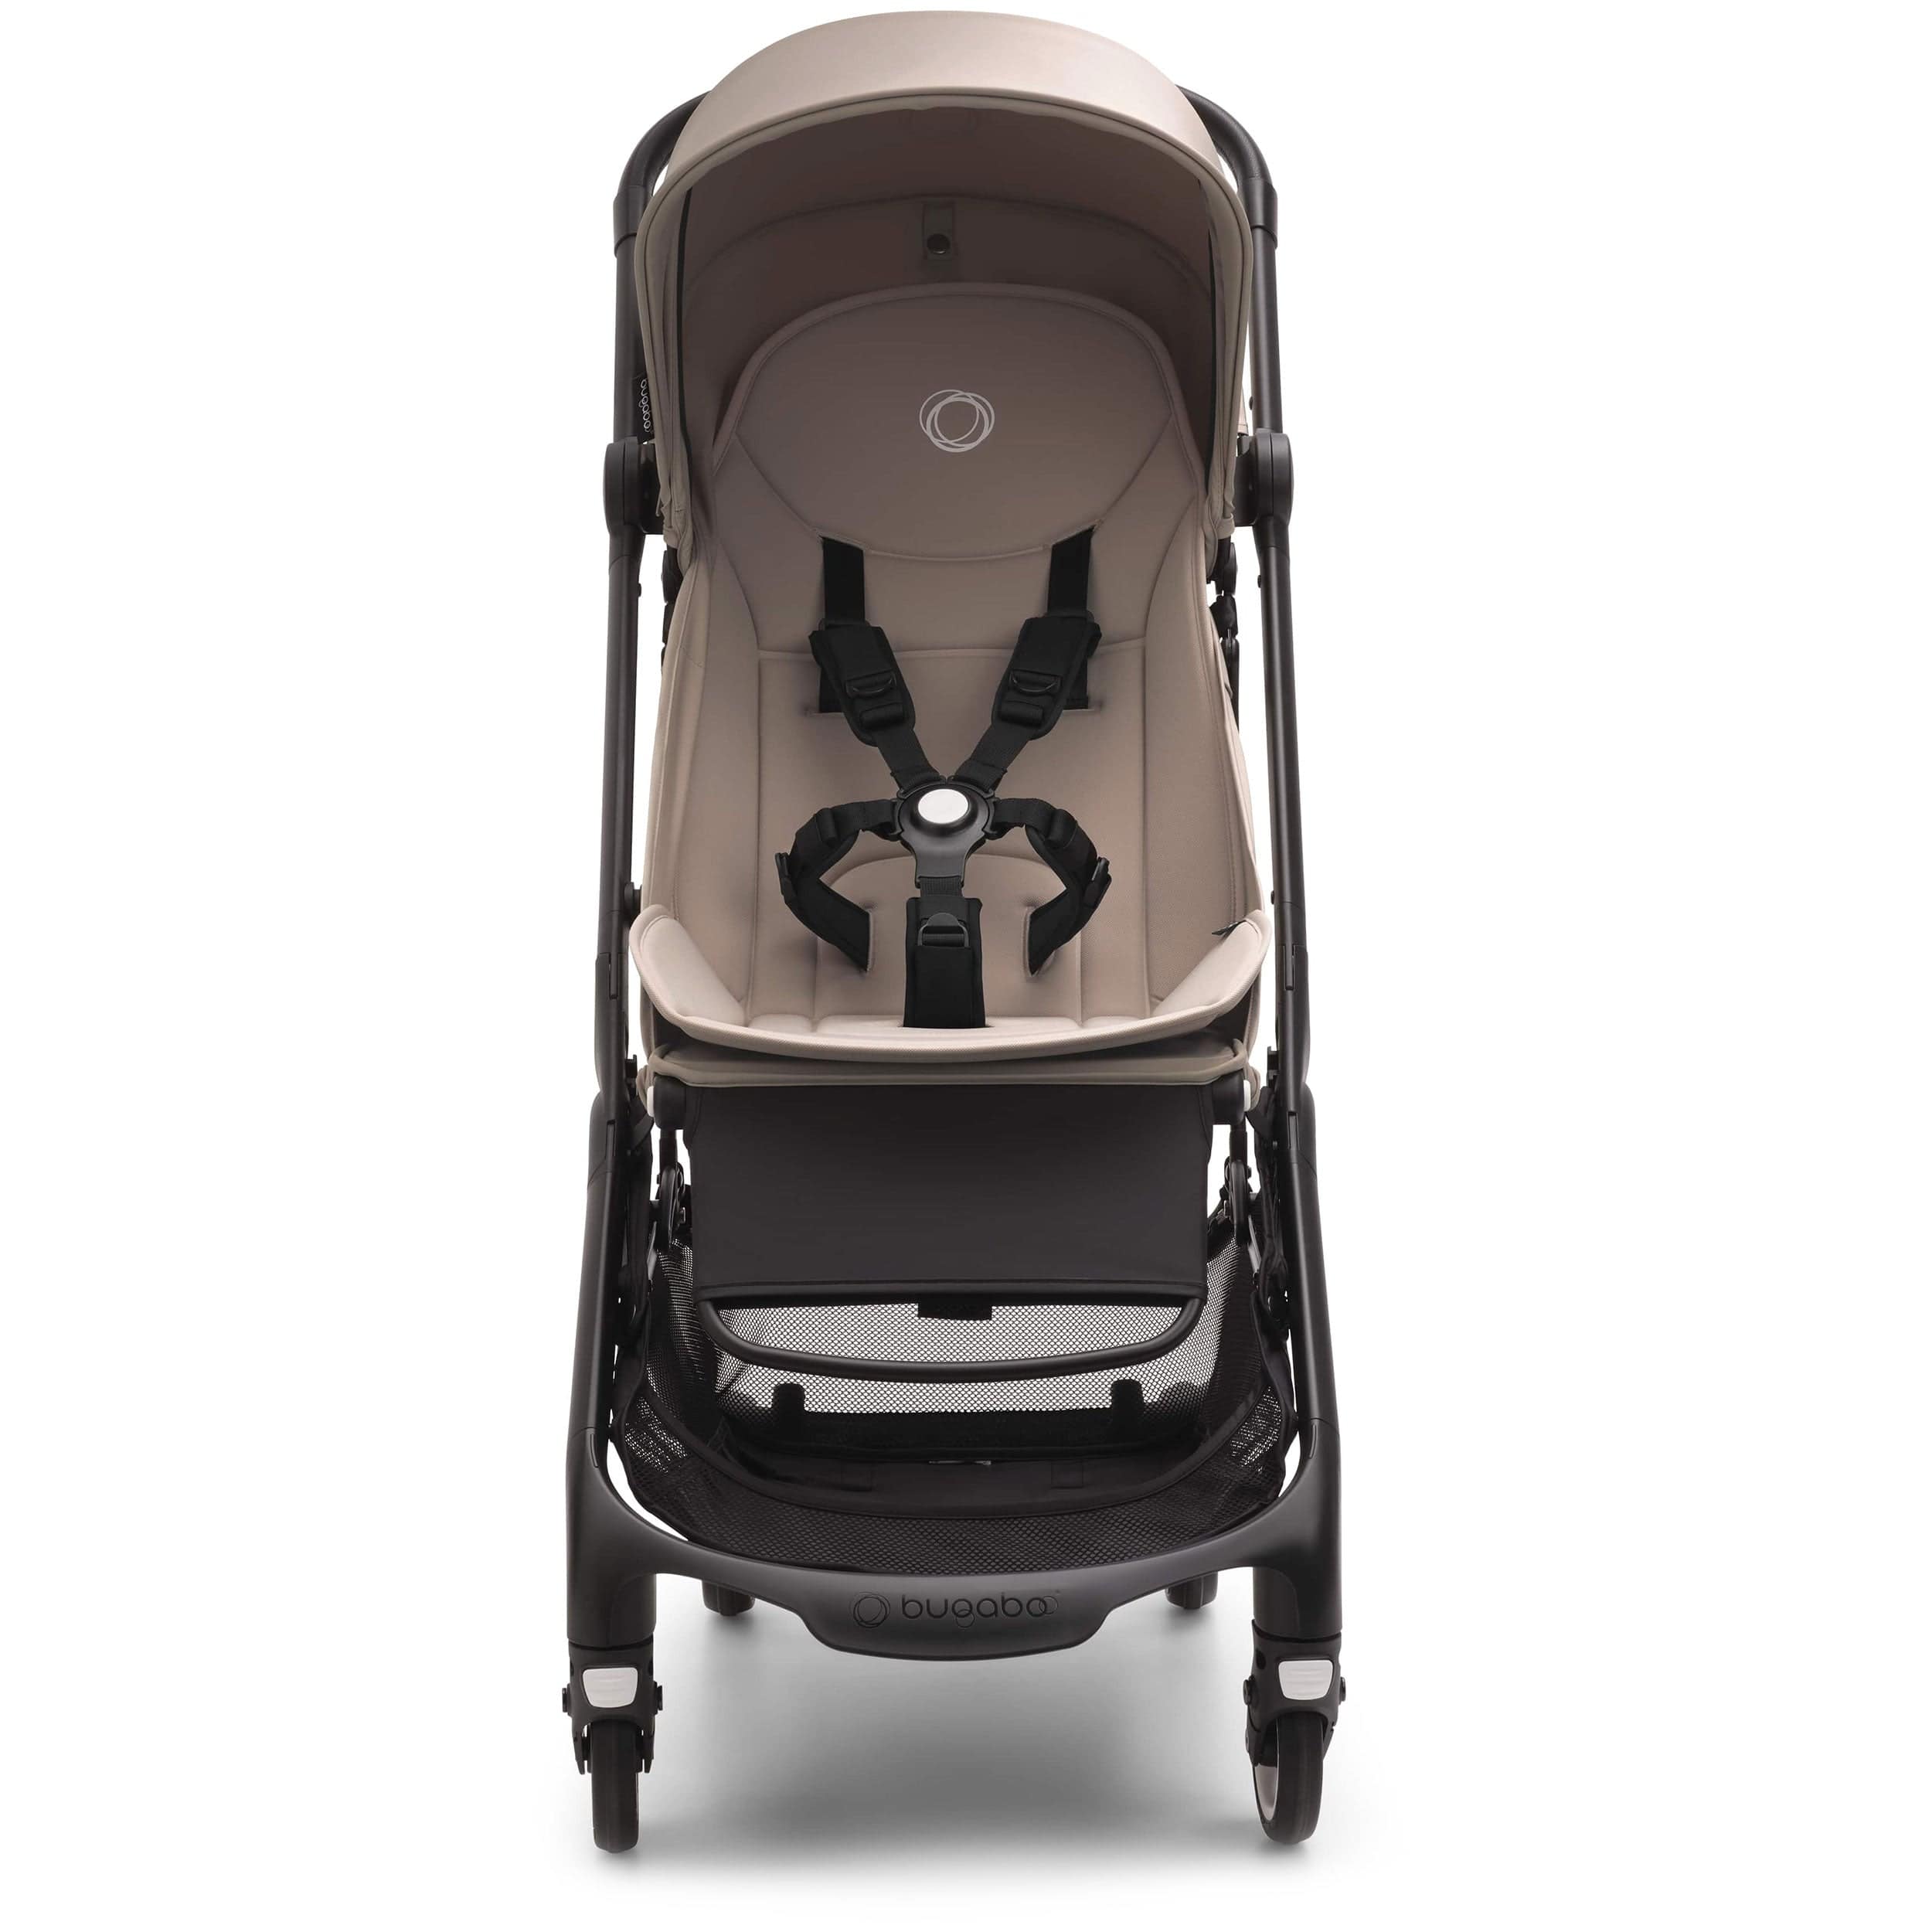 Bugaboo baby pushchairs Bugaboo Butterfly Compact Stroller - Desert Taupe 100025031